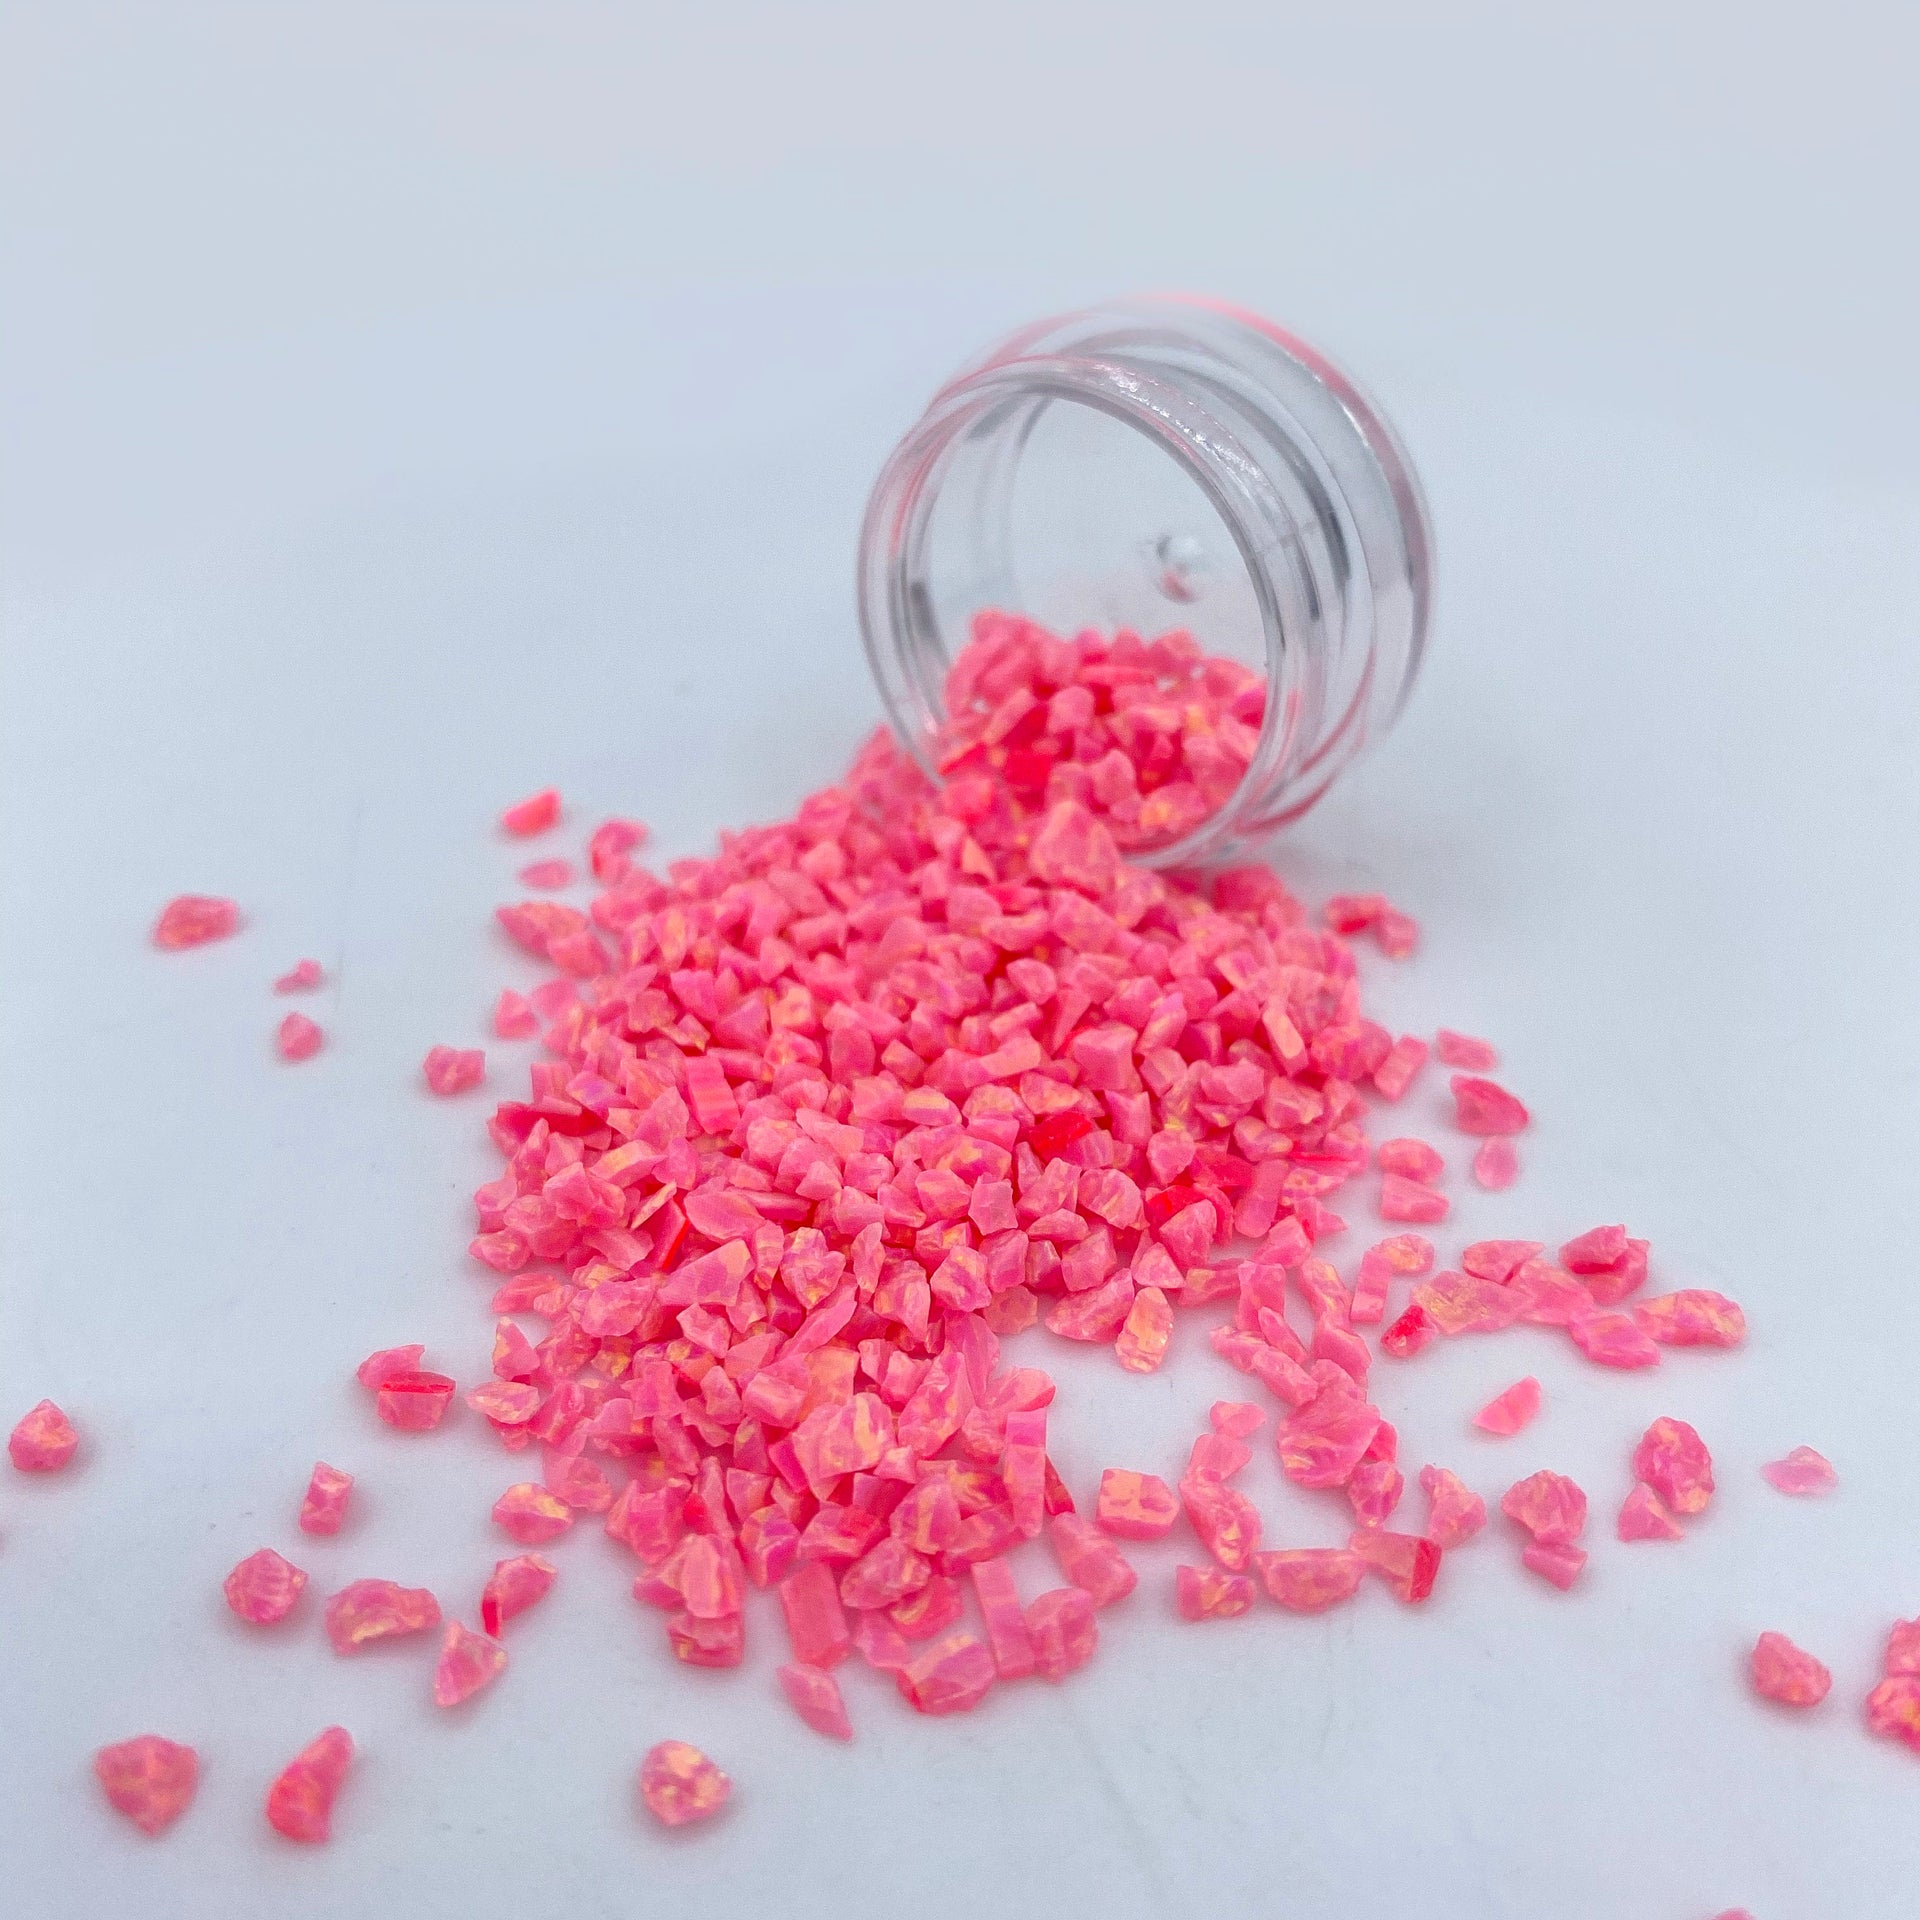 Astro Dust Rose Pink Color Pigment